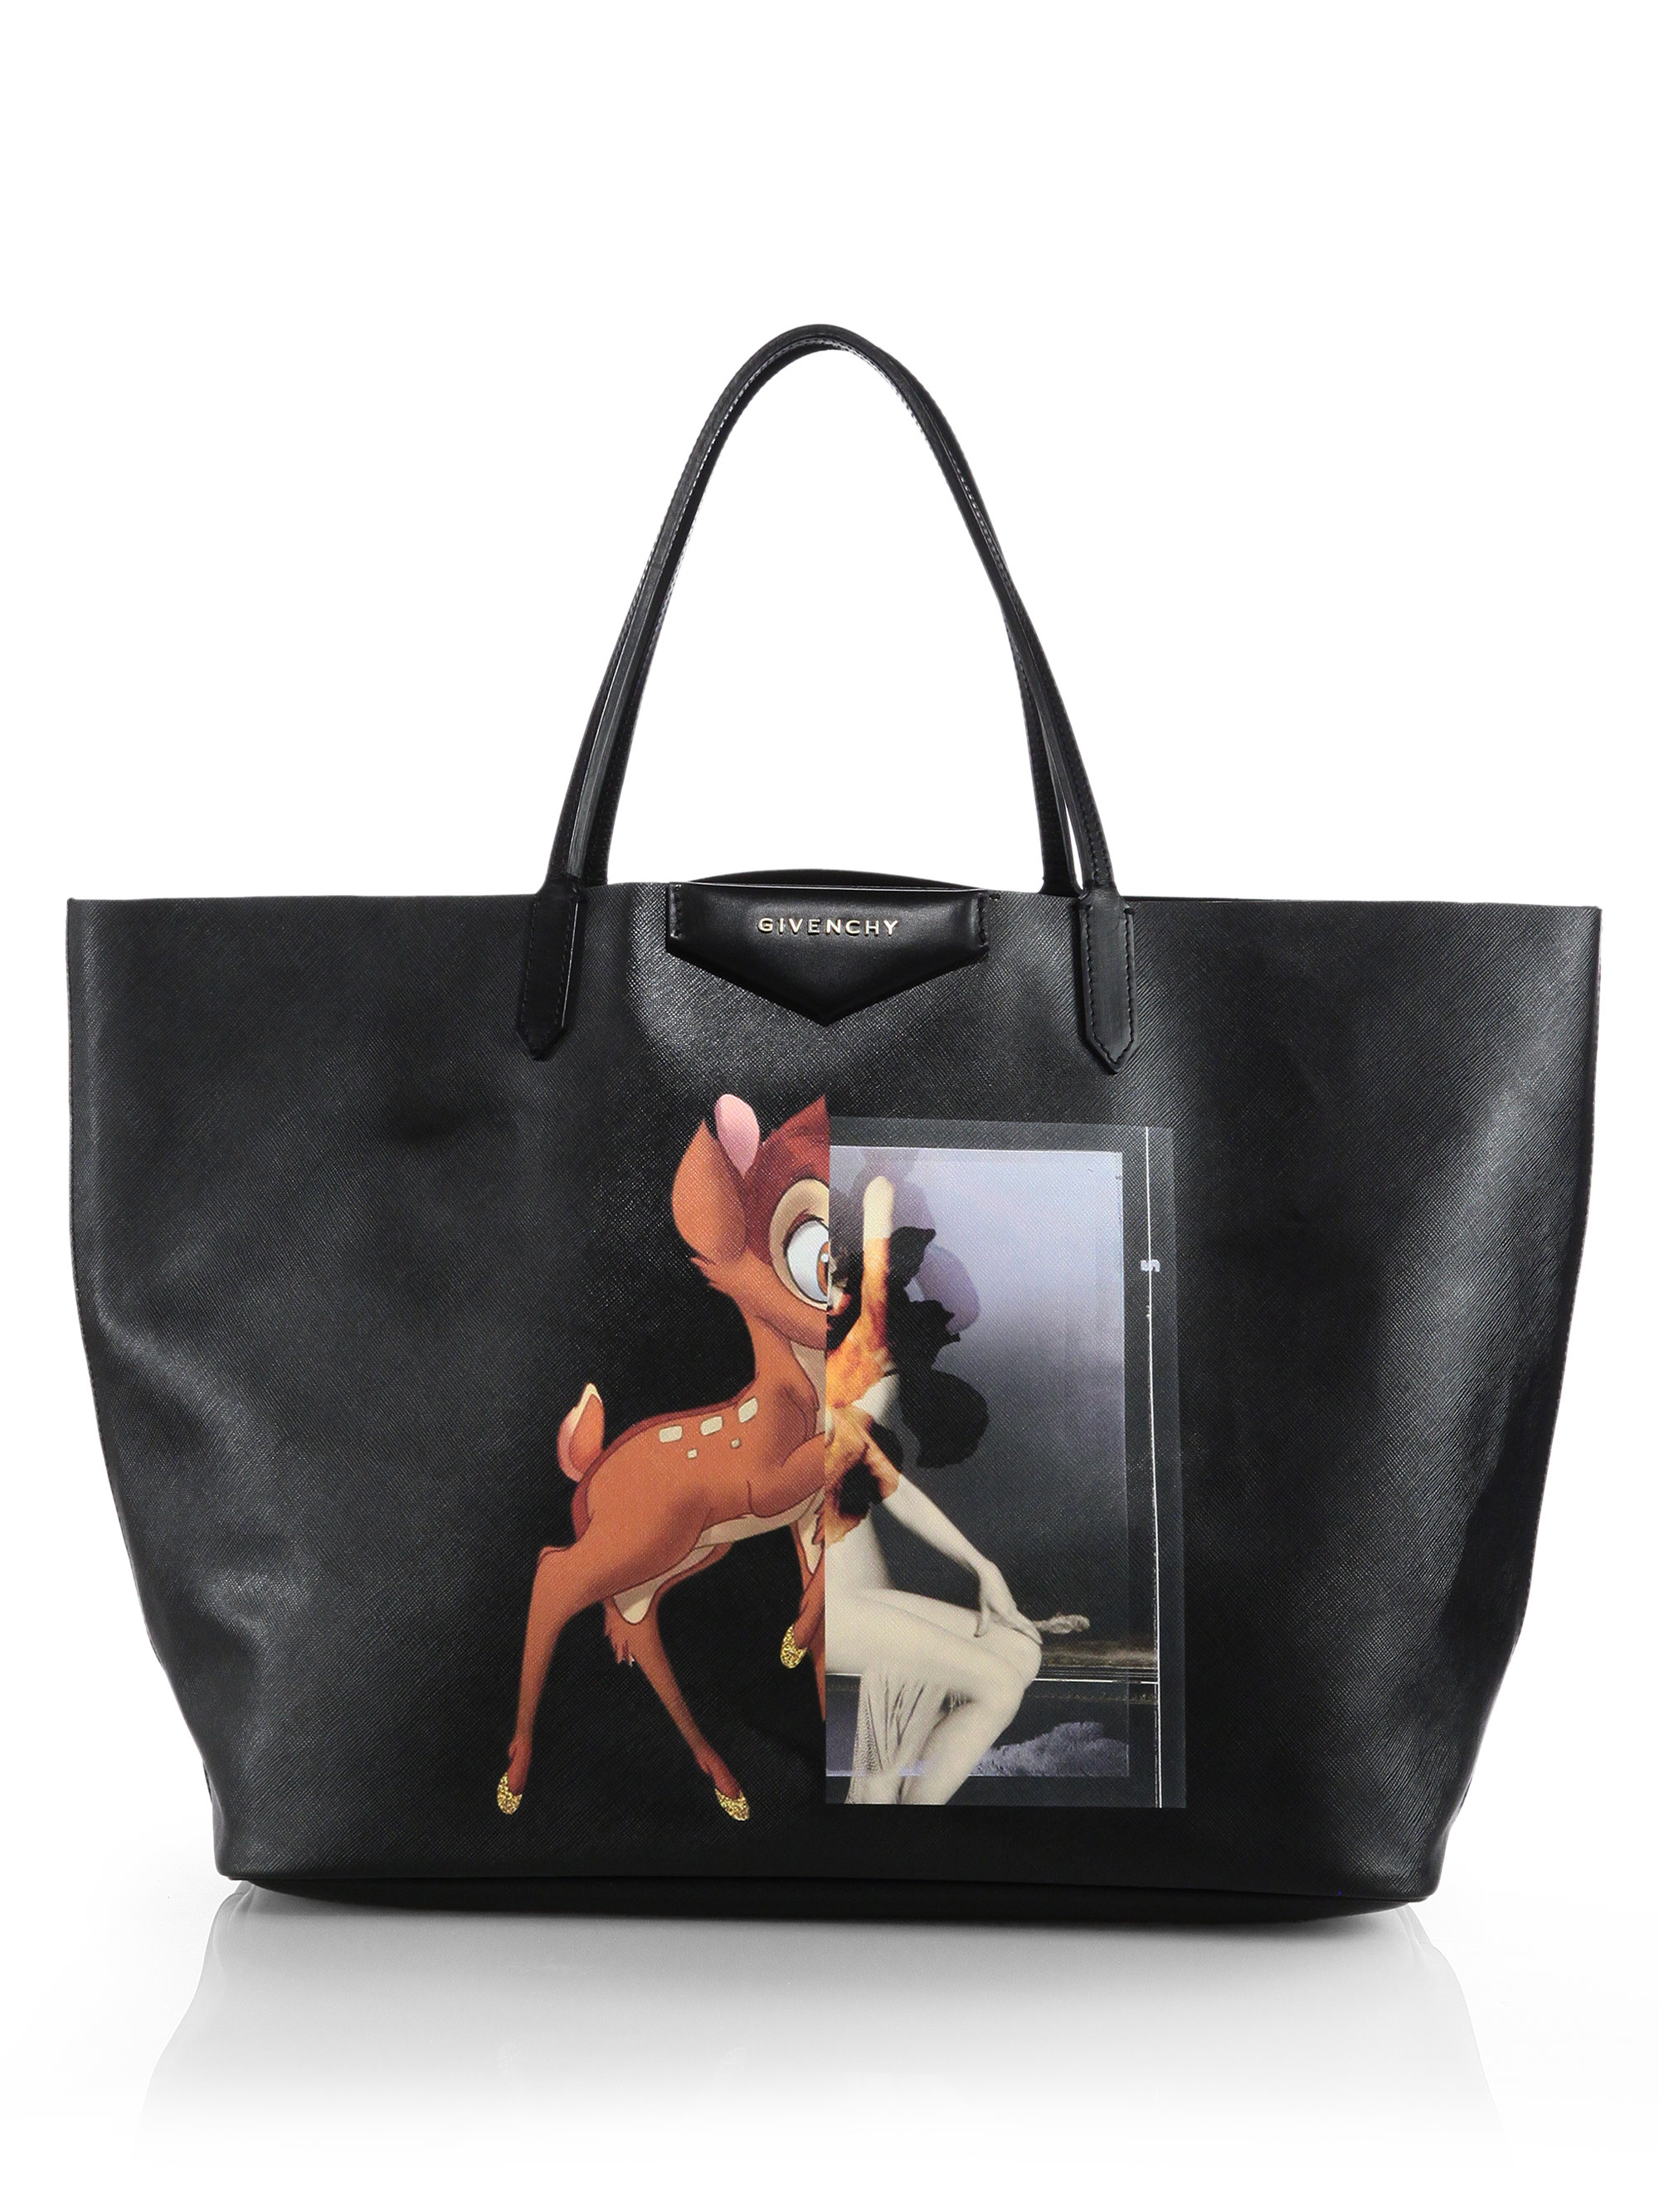 Lyst - Givenchy Bambi Medium Leather Shopper Tote in Black2000 x 2667